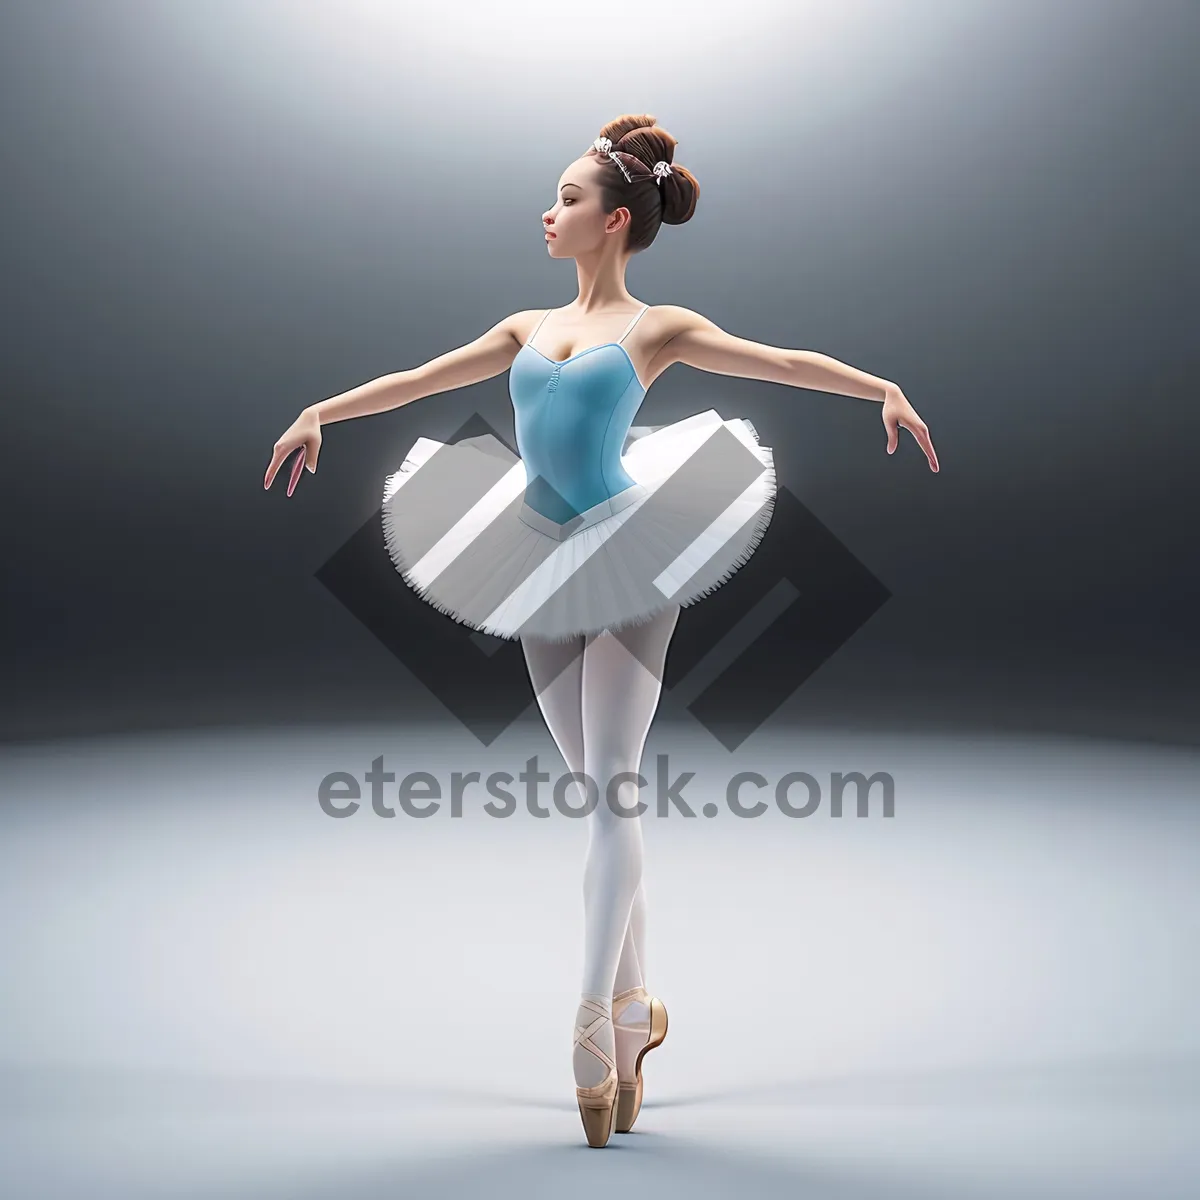 Picture of Elegant Ballet Pose: Graceful Body in Artistic Dance